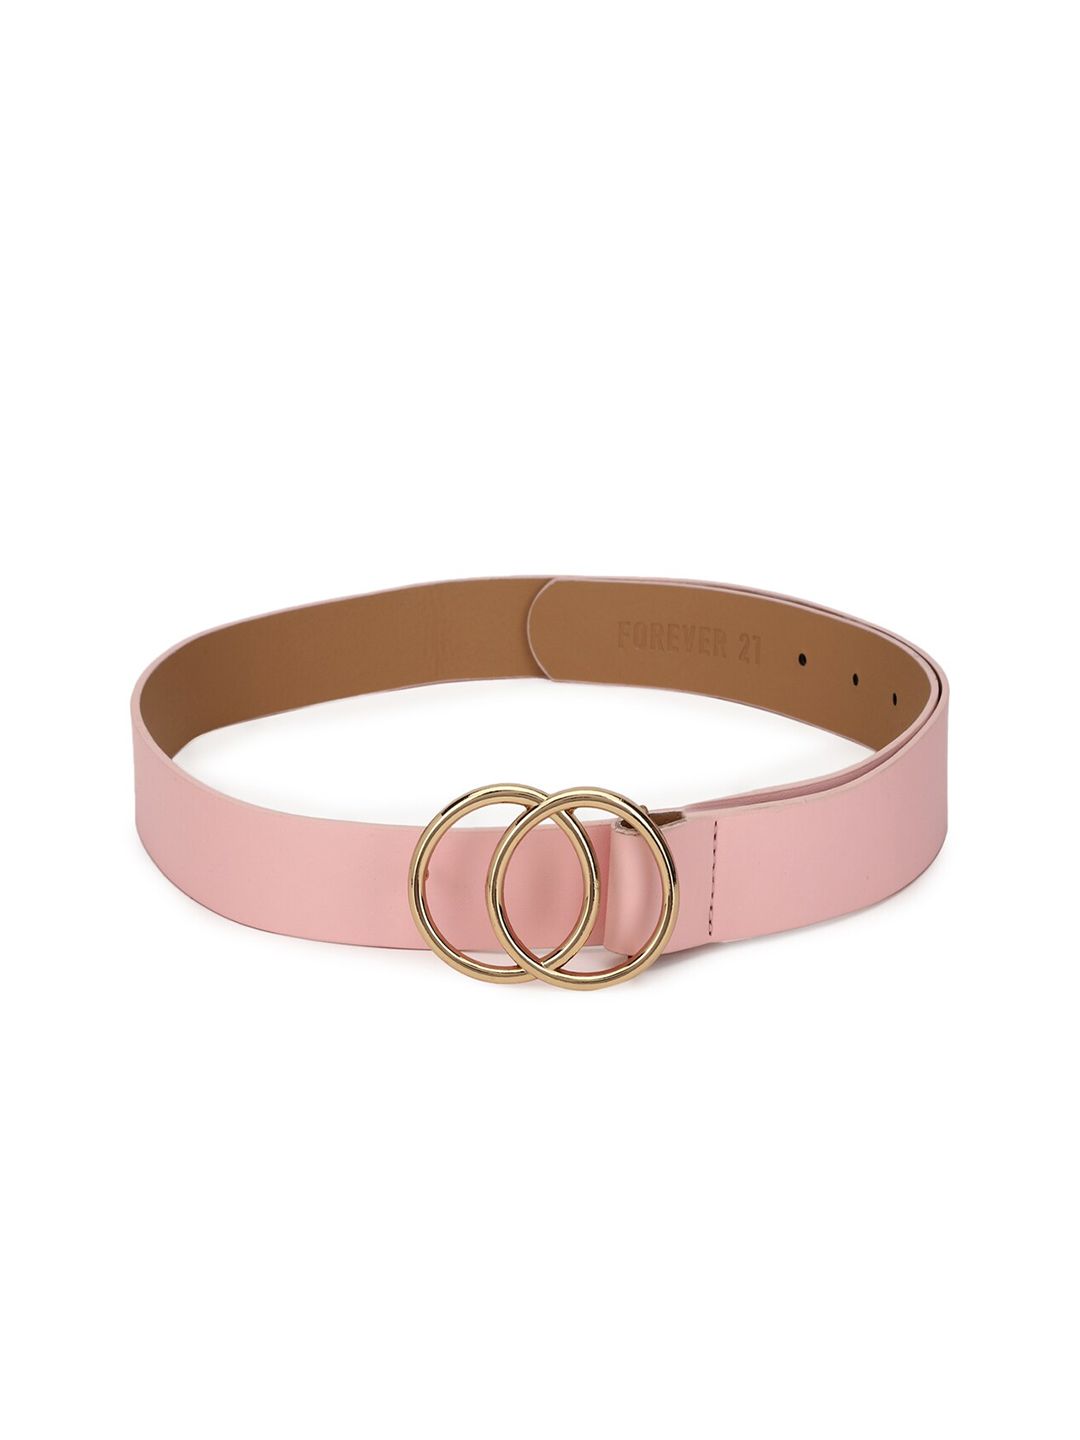 FOREVER 21 Women Pink Solid Belt Price in India